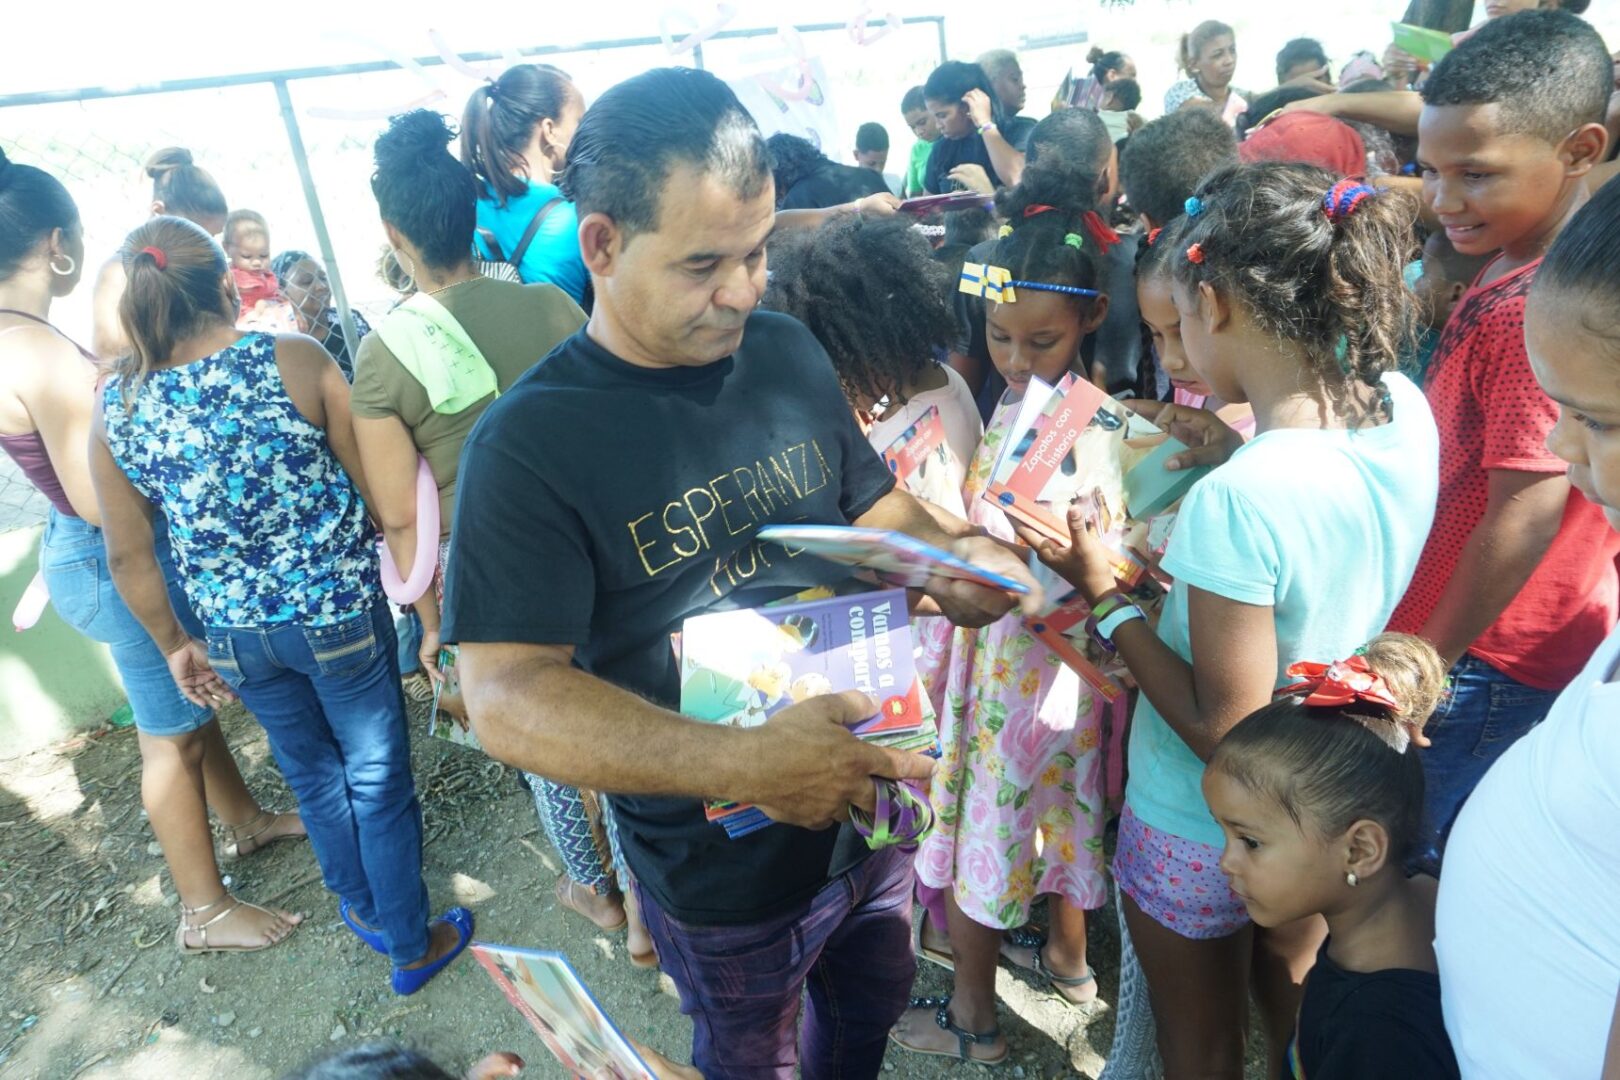 A male staff giving away books